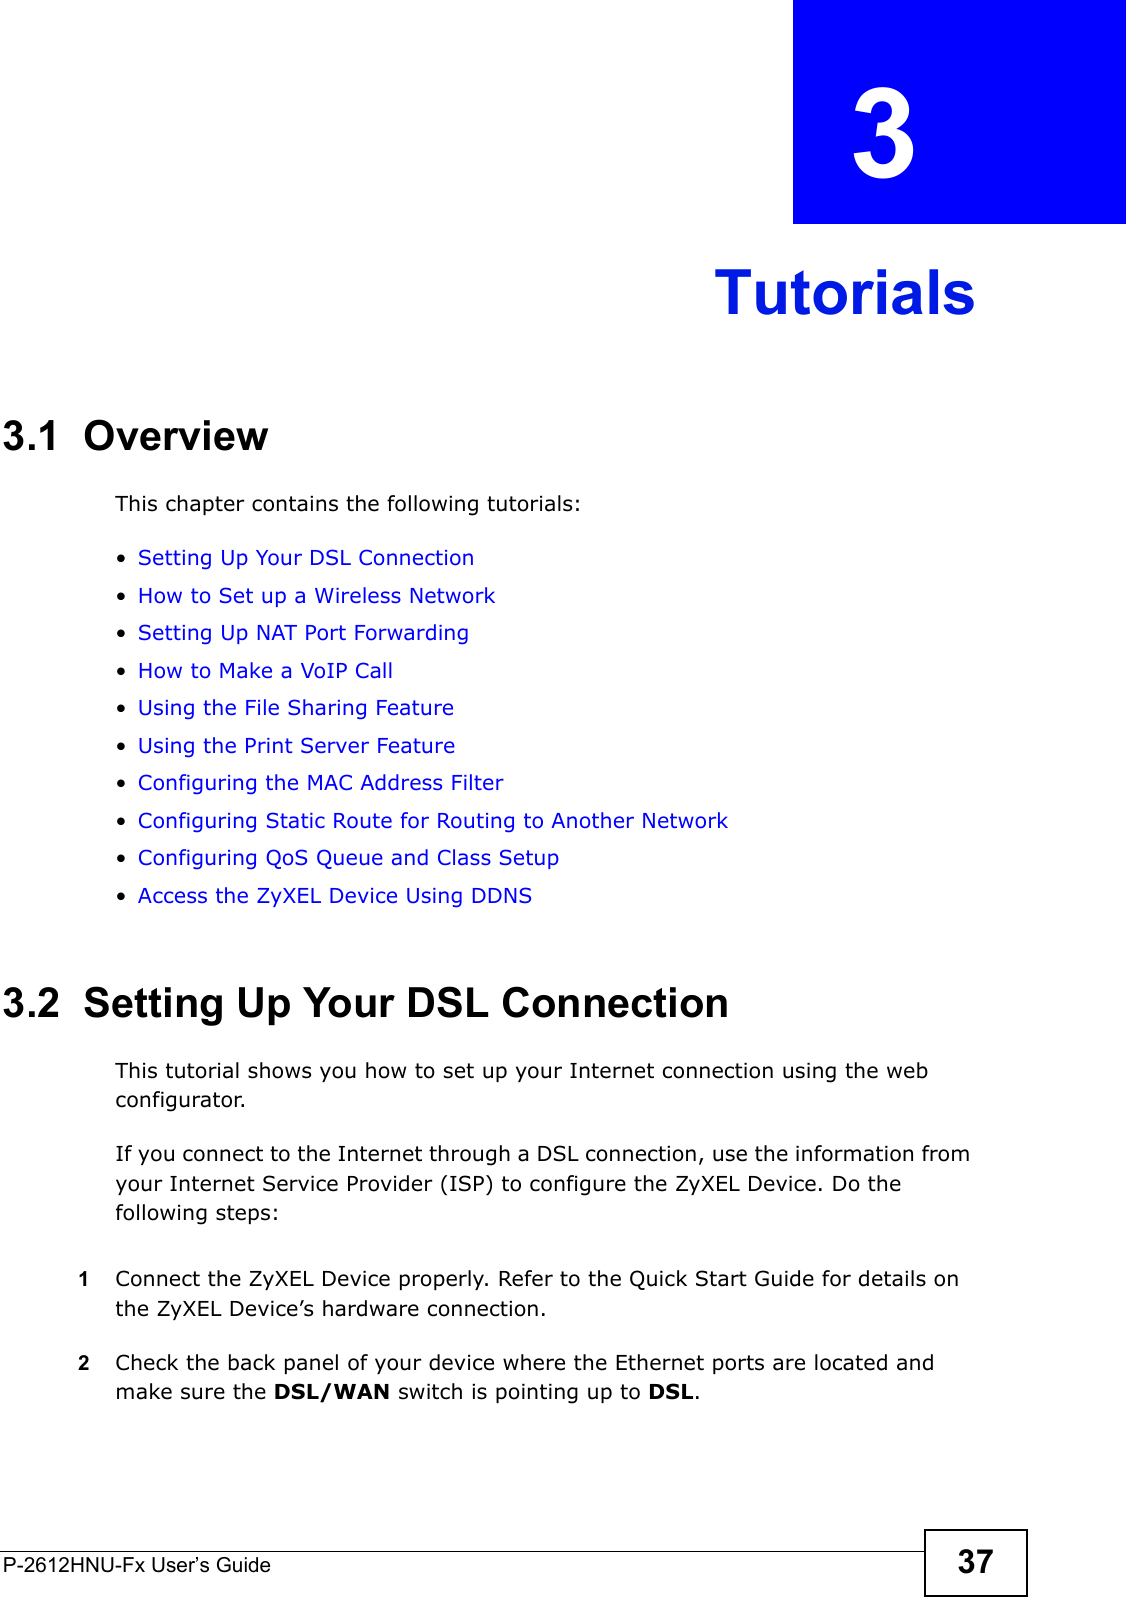 P-2612HNU-Fx User’s Guide 37CHAPTER   3 Tutorials3.1  OverviewThis chapter contains the following tutorials:•Setting Up Your DSL Connection•How to Set up a Wireless Network•Setting Up NAT Port Forwarding•How to Make a VoIP Call•Using the File Sharing Feature•Using the Print Server Feature•Configuring the MAC Address Filter•Configuring Static Route for Routing to Another Network•Configuring QoS Queue and Class Setup•Access the ZyXEL Device Using DDNS3.2  Setting Up Your DSL ConnectionThis tutorial shows you how to set up your Internet connection using the web configurator. If you connect to the Internet through a DSL connection, use the information from your Internet Service Provider (ISP) to configure the ZyXEL Device. Do thefollowing steps:1Connect the ZyXEL Device properly. Refer to the Quick Start Guide for details onthe ZyXEL Device’s hardware connection. 2Check the back panel of your device where the Ethernet ports are located and make sure the DSL/WAN switch is pointing up to DSL.